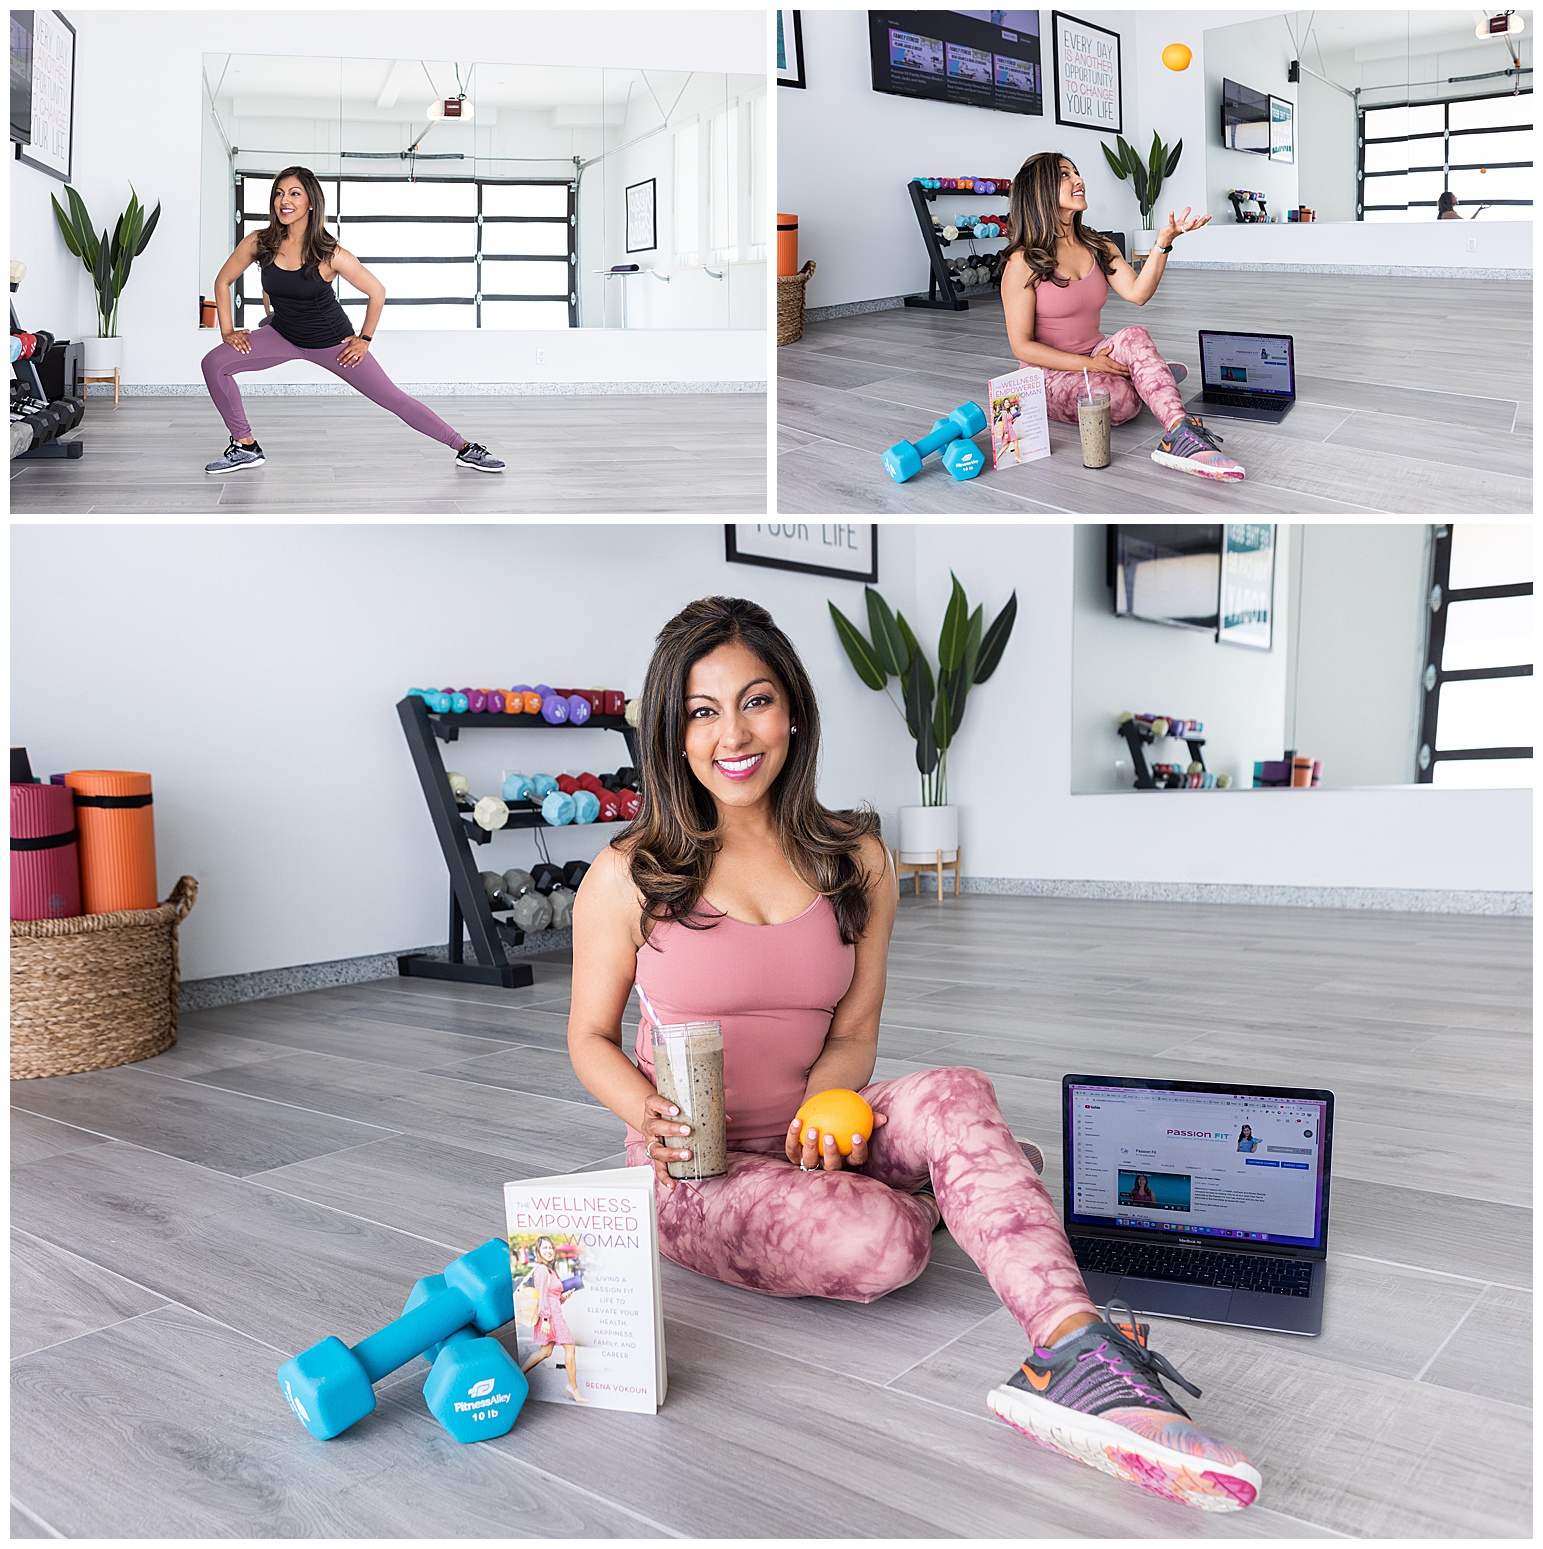 Branding photos for Passion Fit